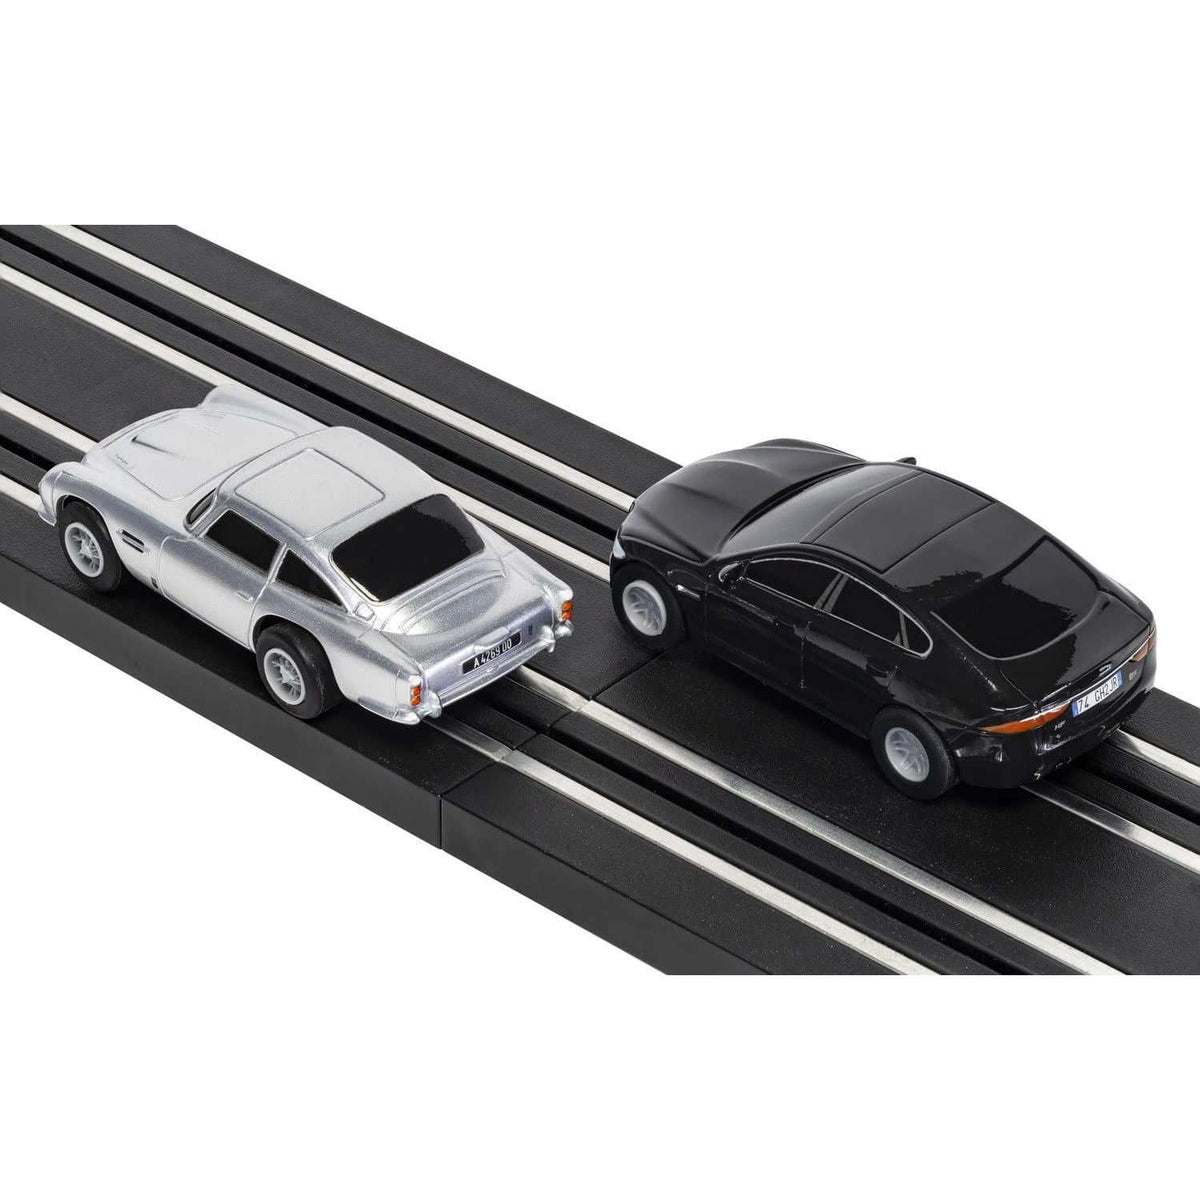 James Bond Micro Scalextric Race Set - No Time To Die Edition - By Scalextric - 007STORE